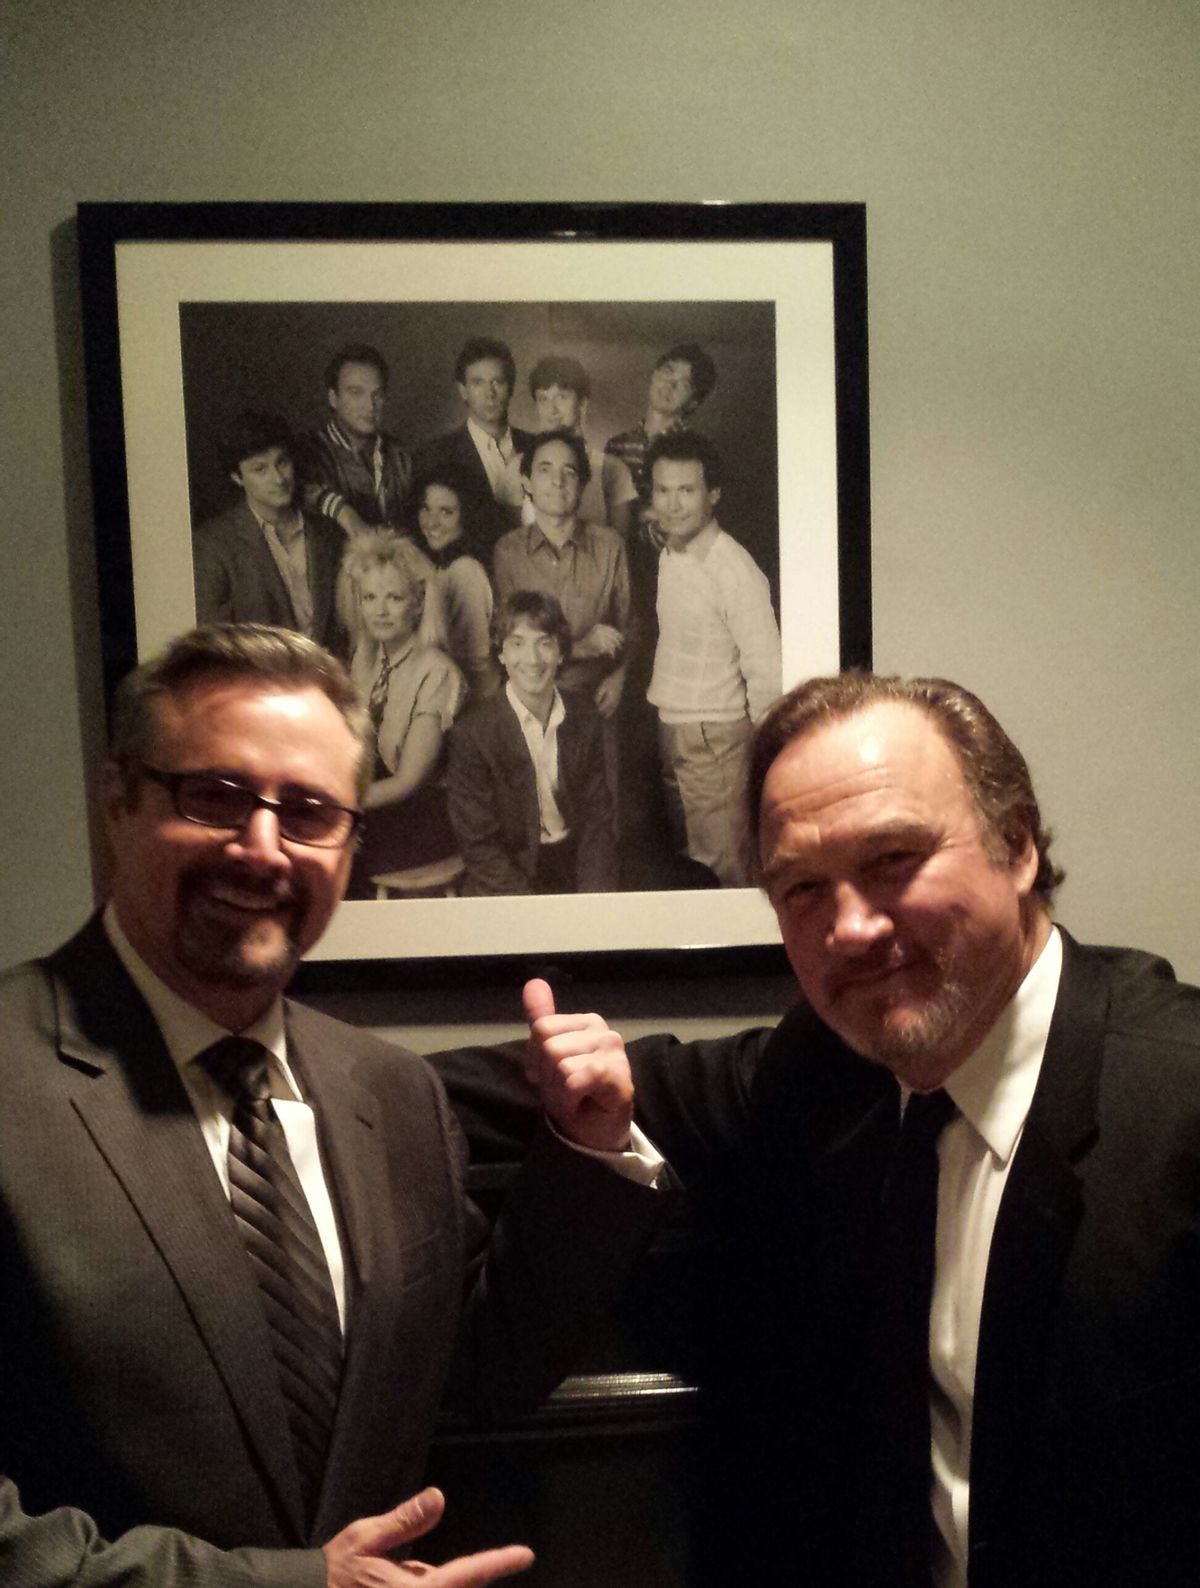  Gary Kroeger and Jim Belushi at 30 Rock, with their cast photo from the 1984-85 season of "SNL"       (GaryHasIssues.com)